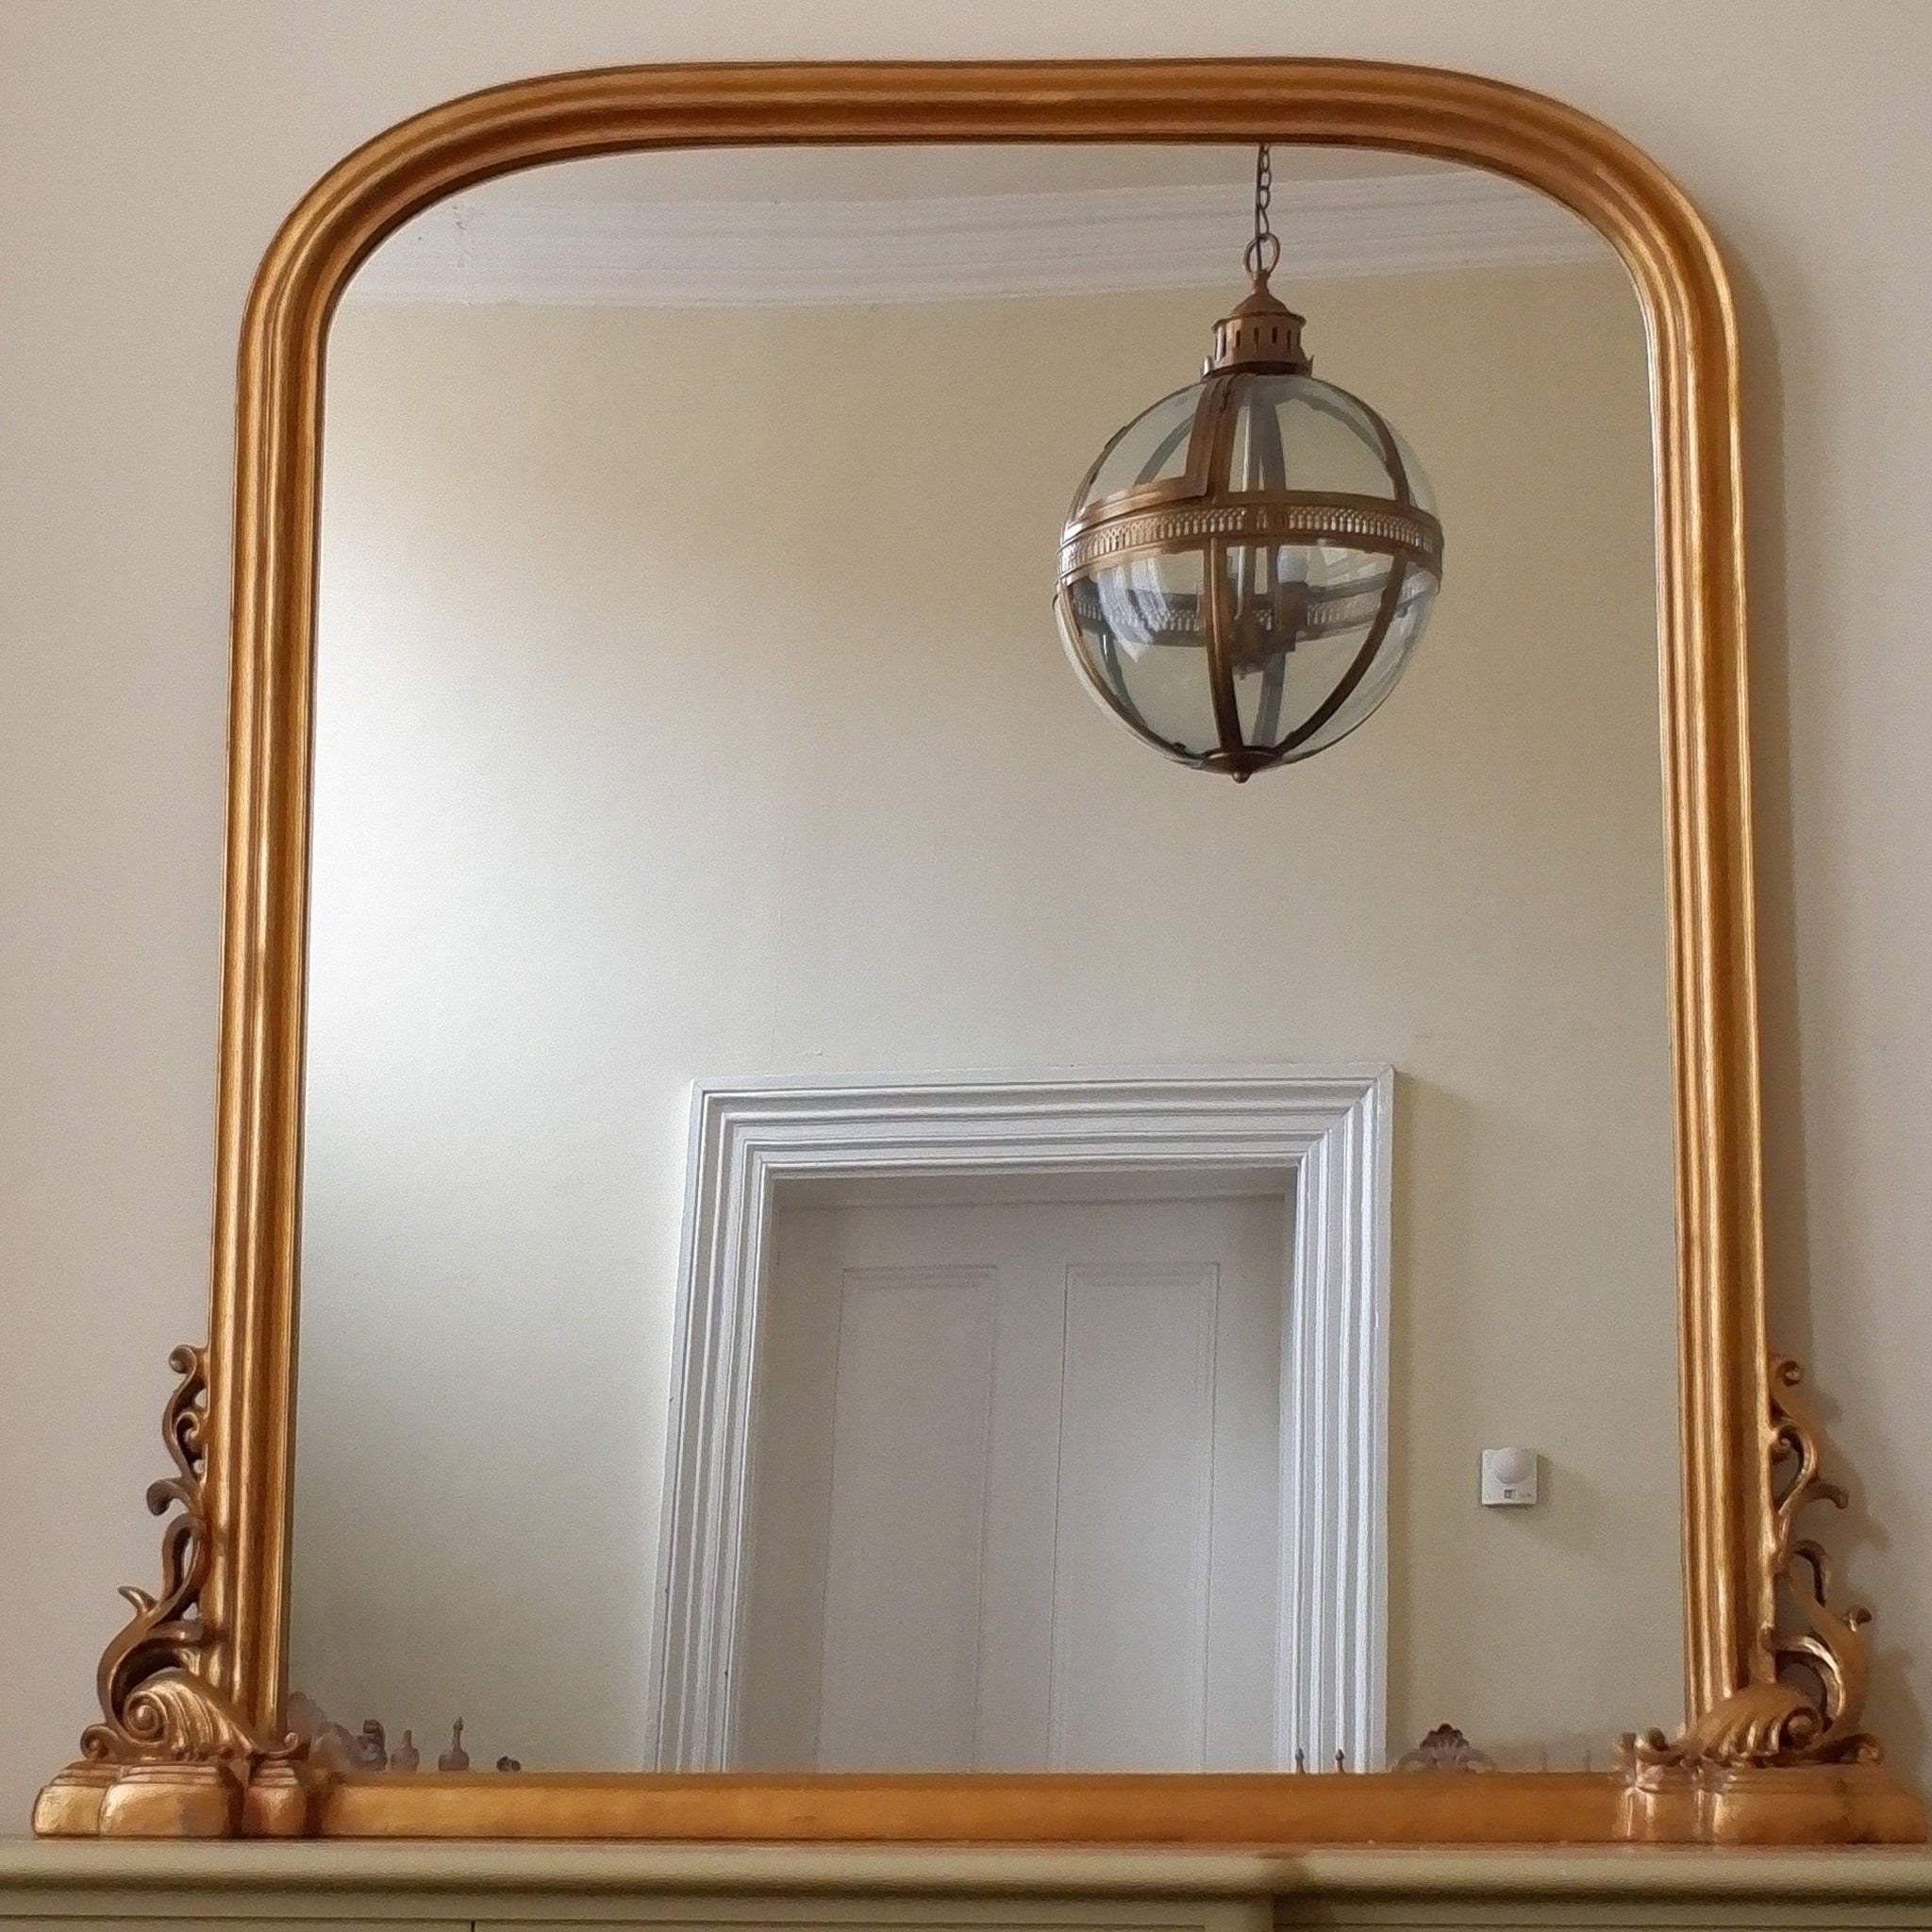 Antique Style LARGE Gold Distressed Arch Overmantel Wall Mirror H137xW136cm